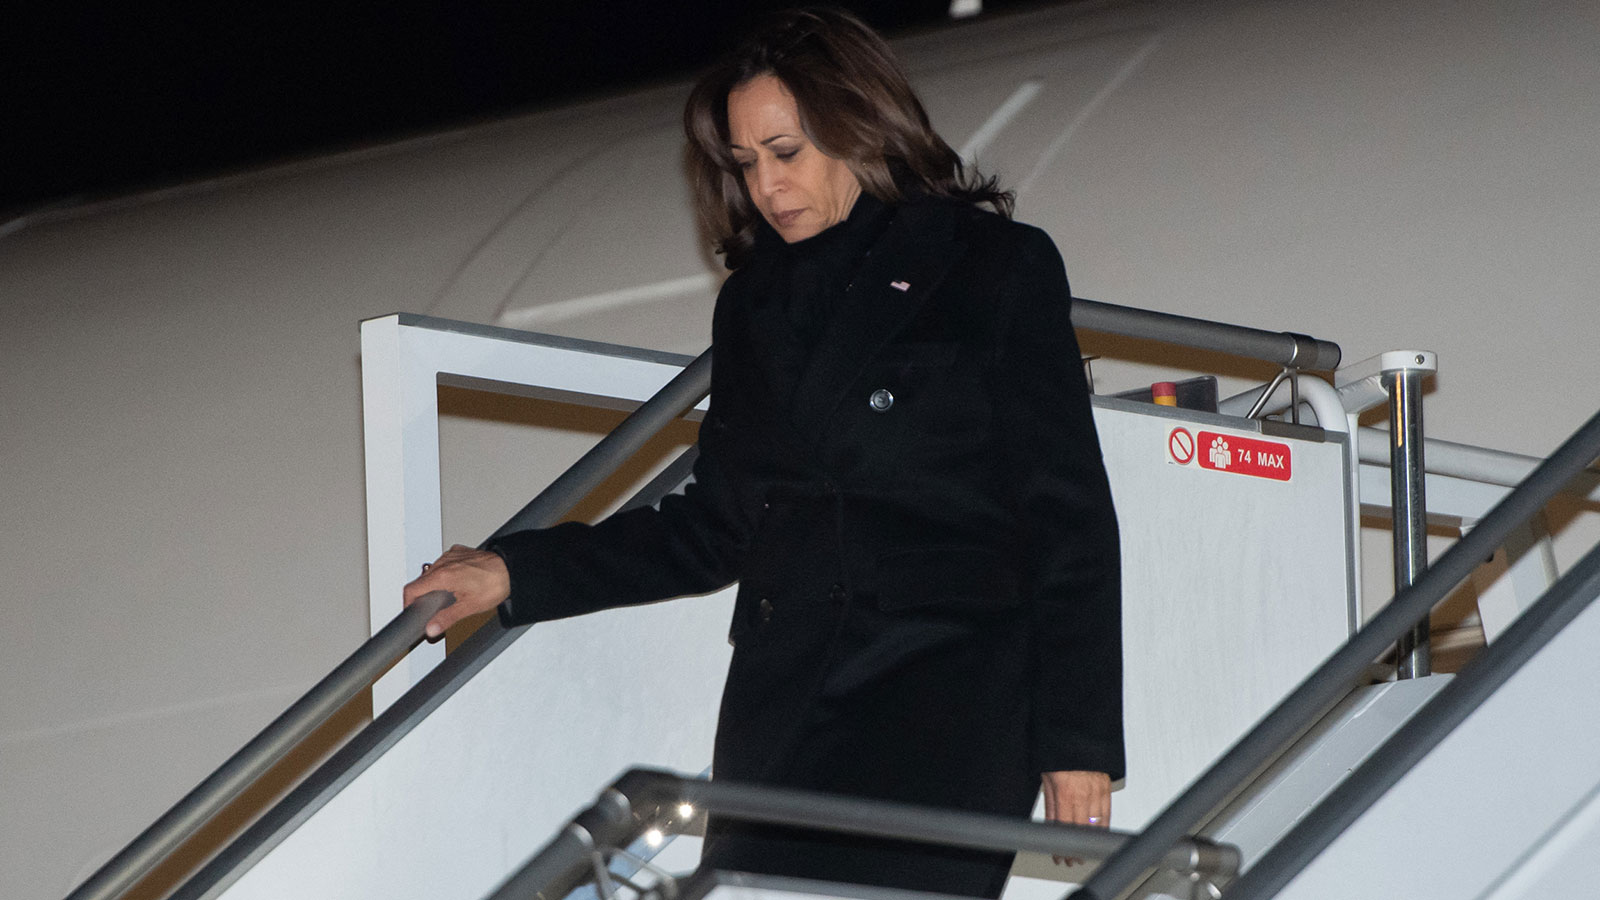 US Vice President Kamala Harris disembarks from Air Force Two upon arrival at Warsaw Chopin Airport in Poland on March 9.